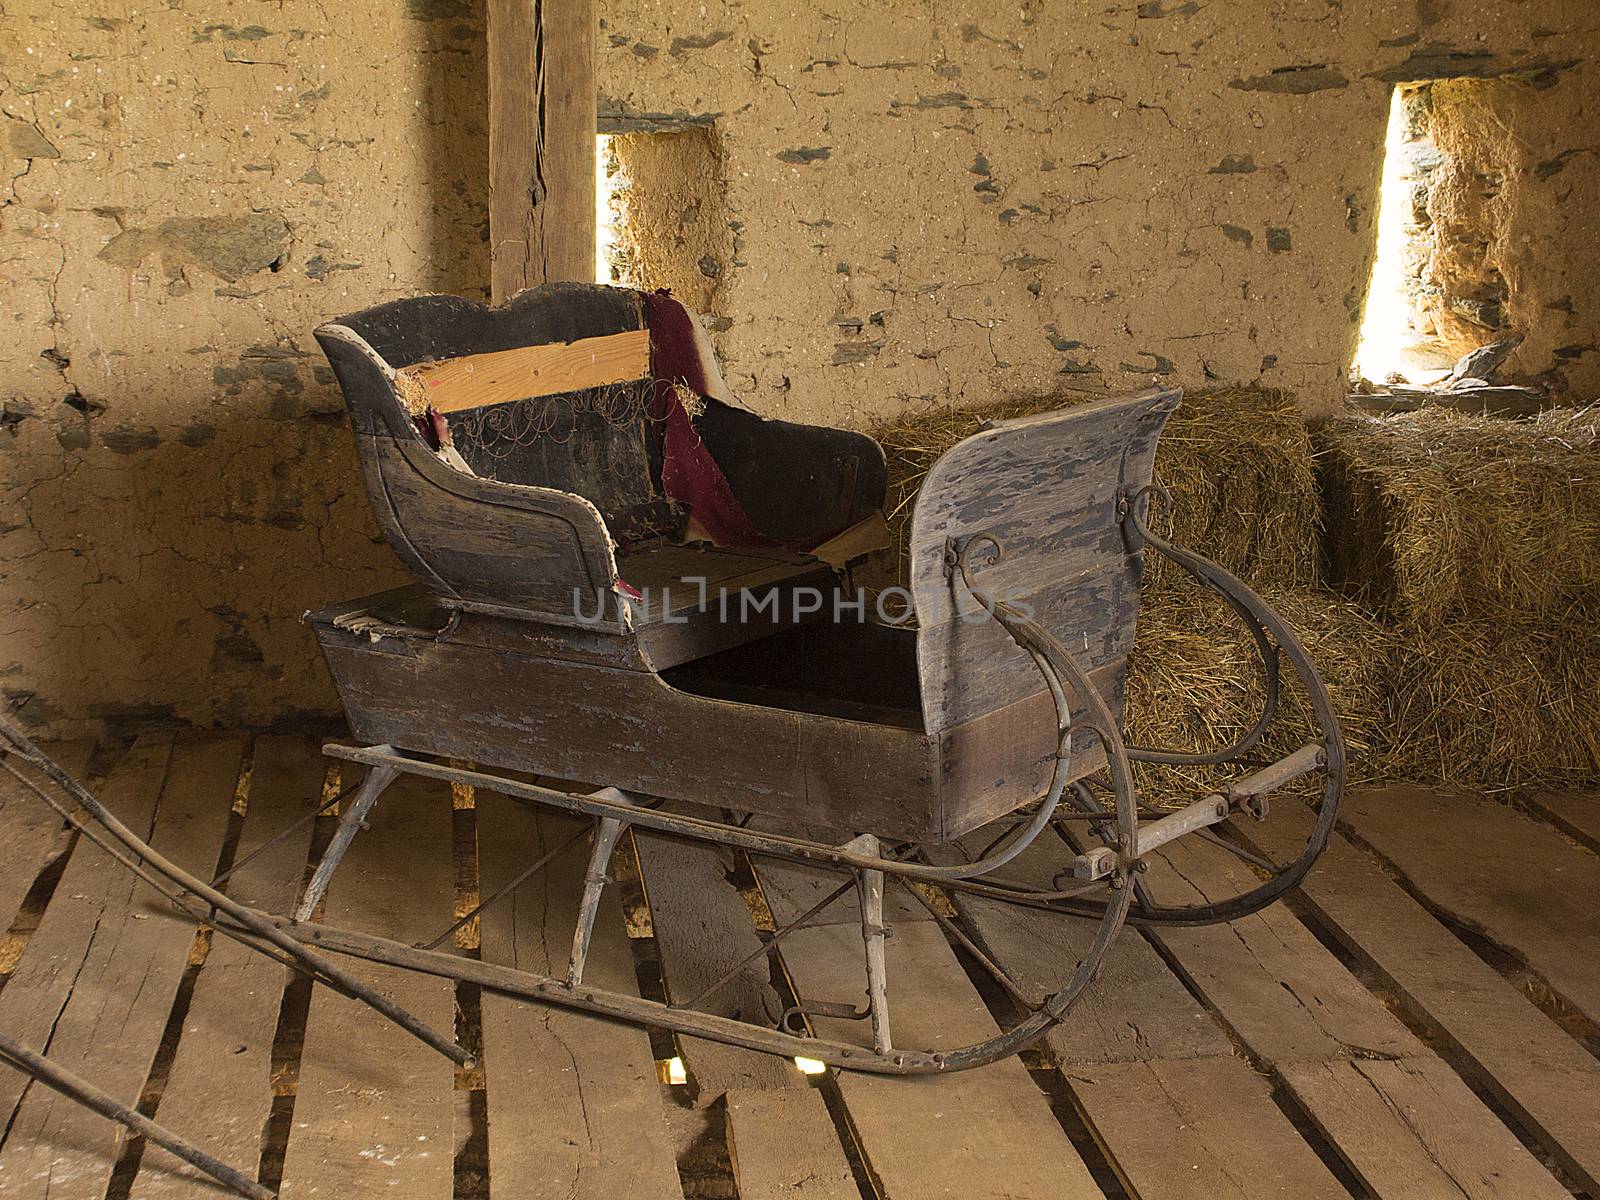 Old horse-drawn sleigh sitting in old barn